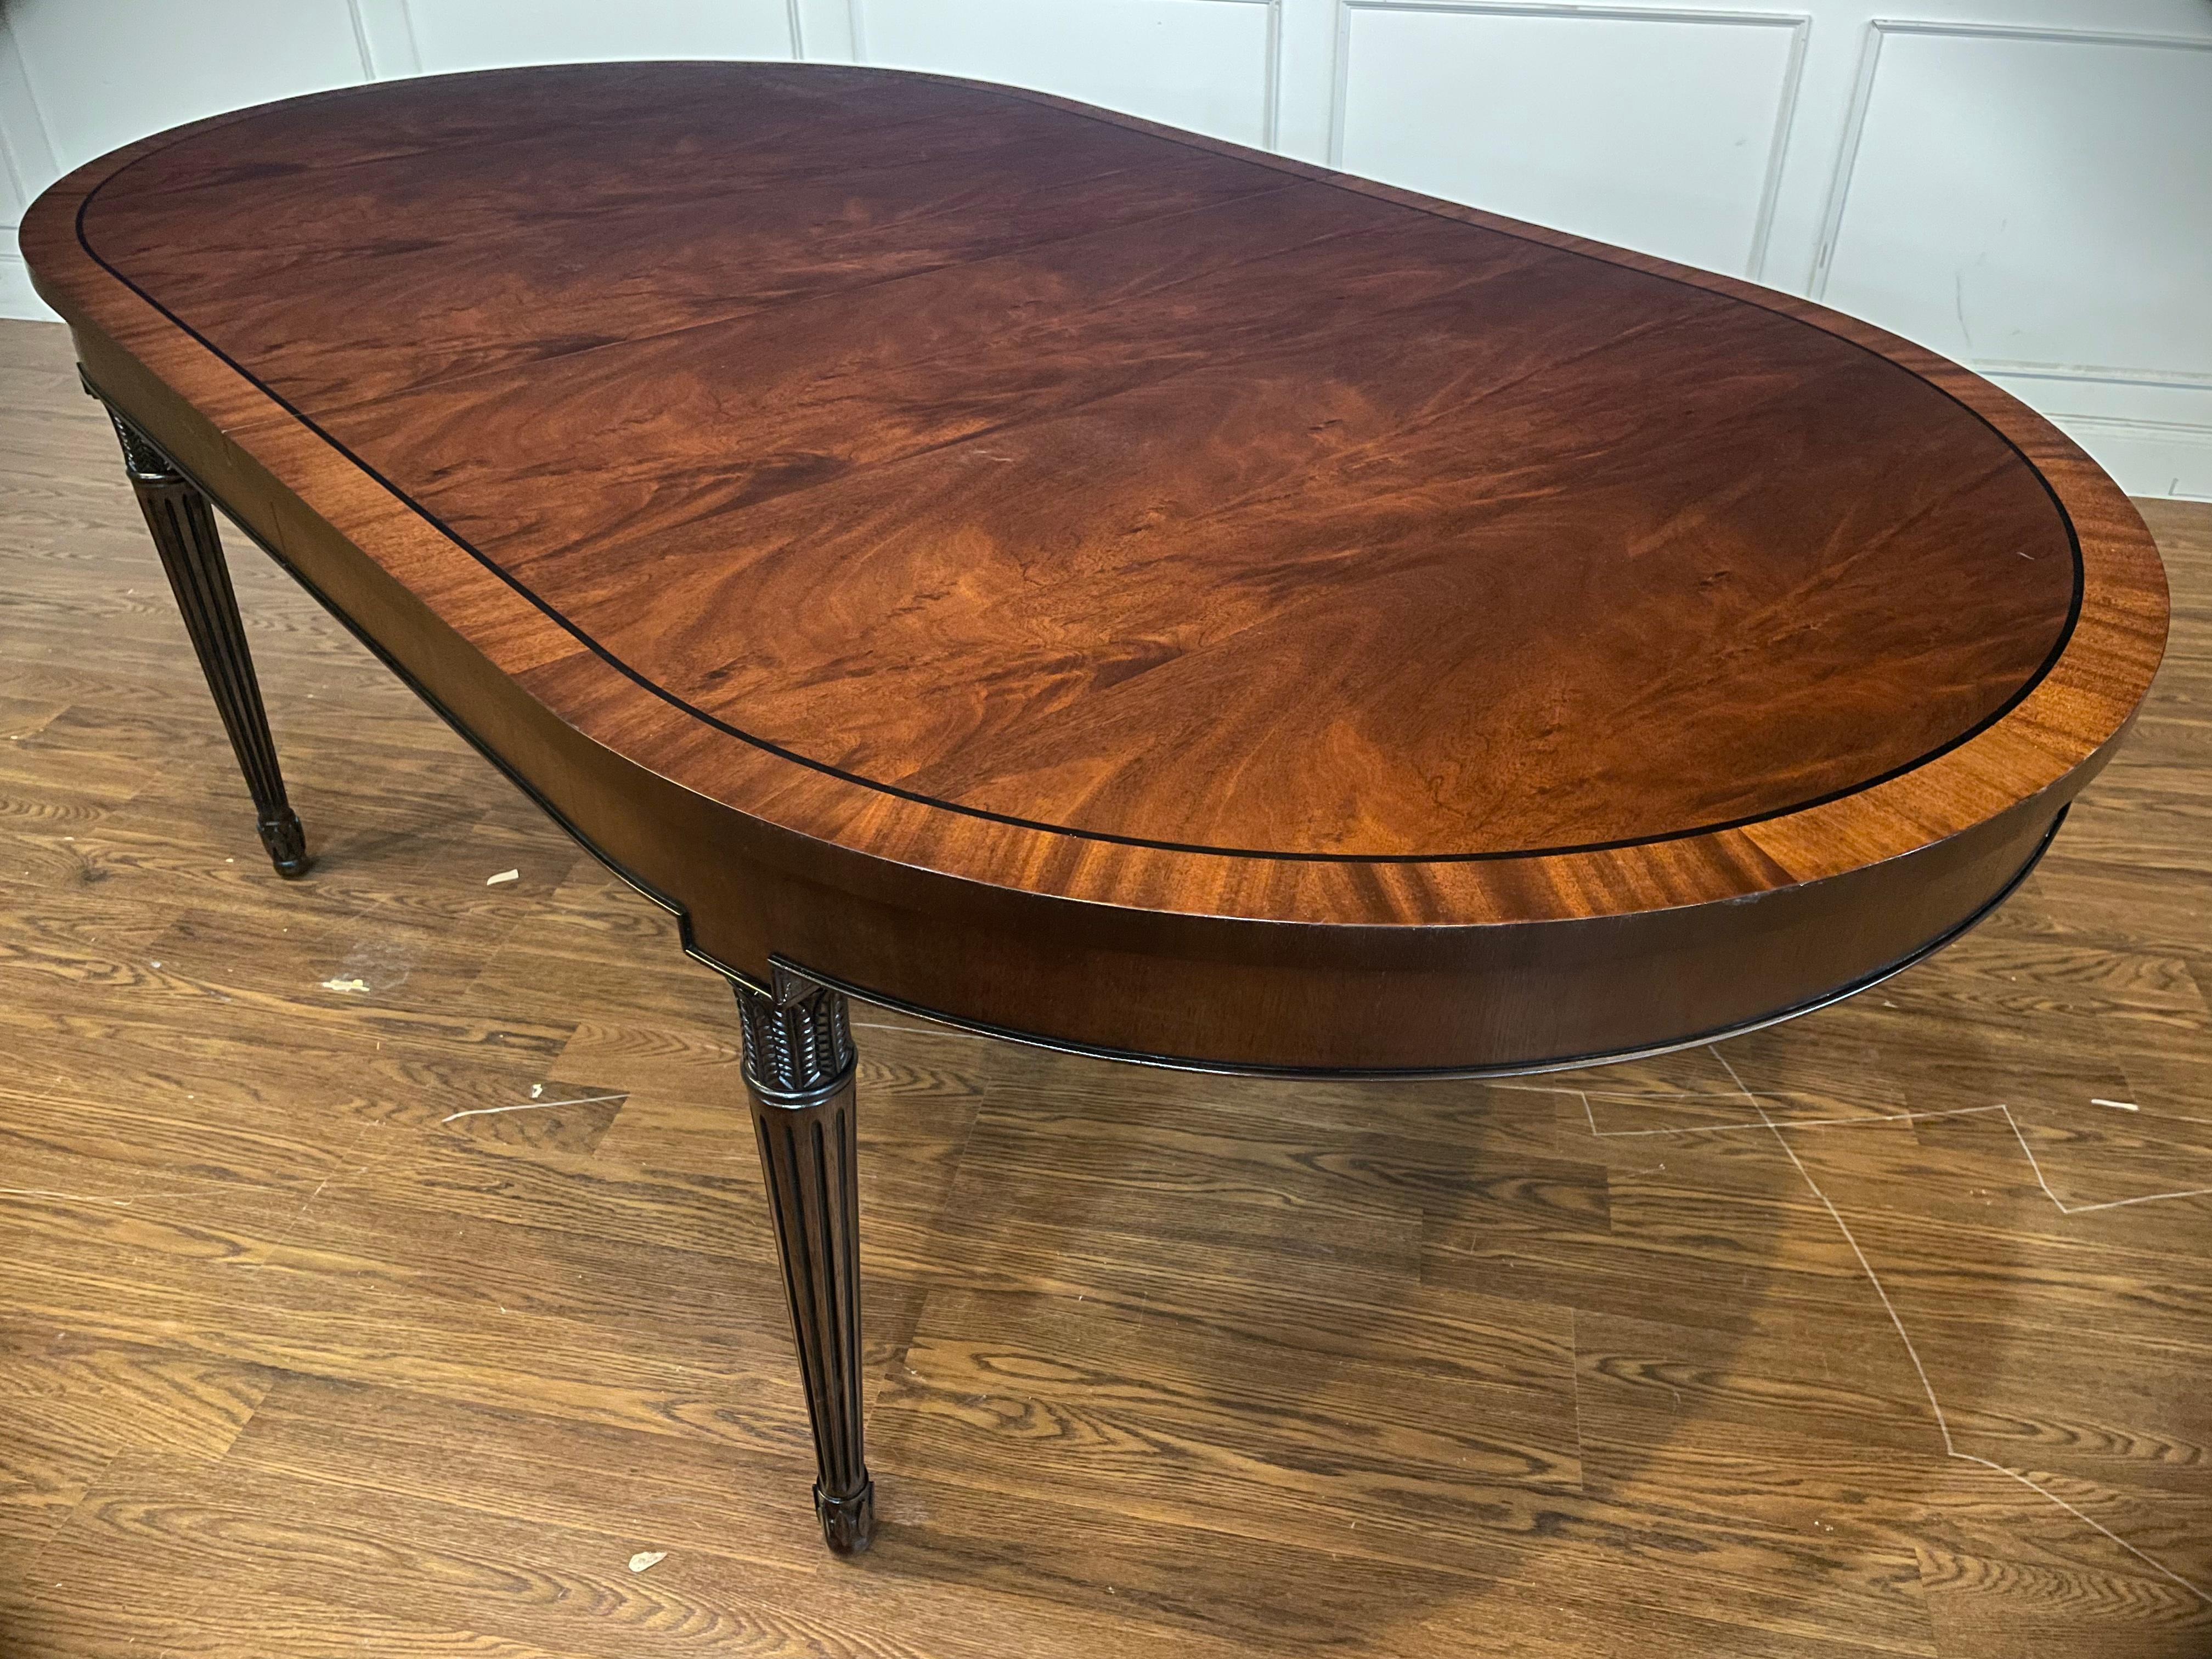 This table features and oval shape with a swirly crotch mahogany field, straight grain mahogany border and classic Sheraton style round fluted and tapered legs. It has a hand rubbed and polished semigloss sheen. 

Dimensions: Width=48”,